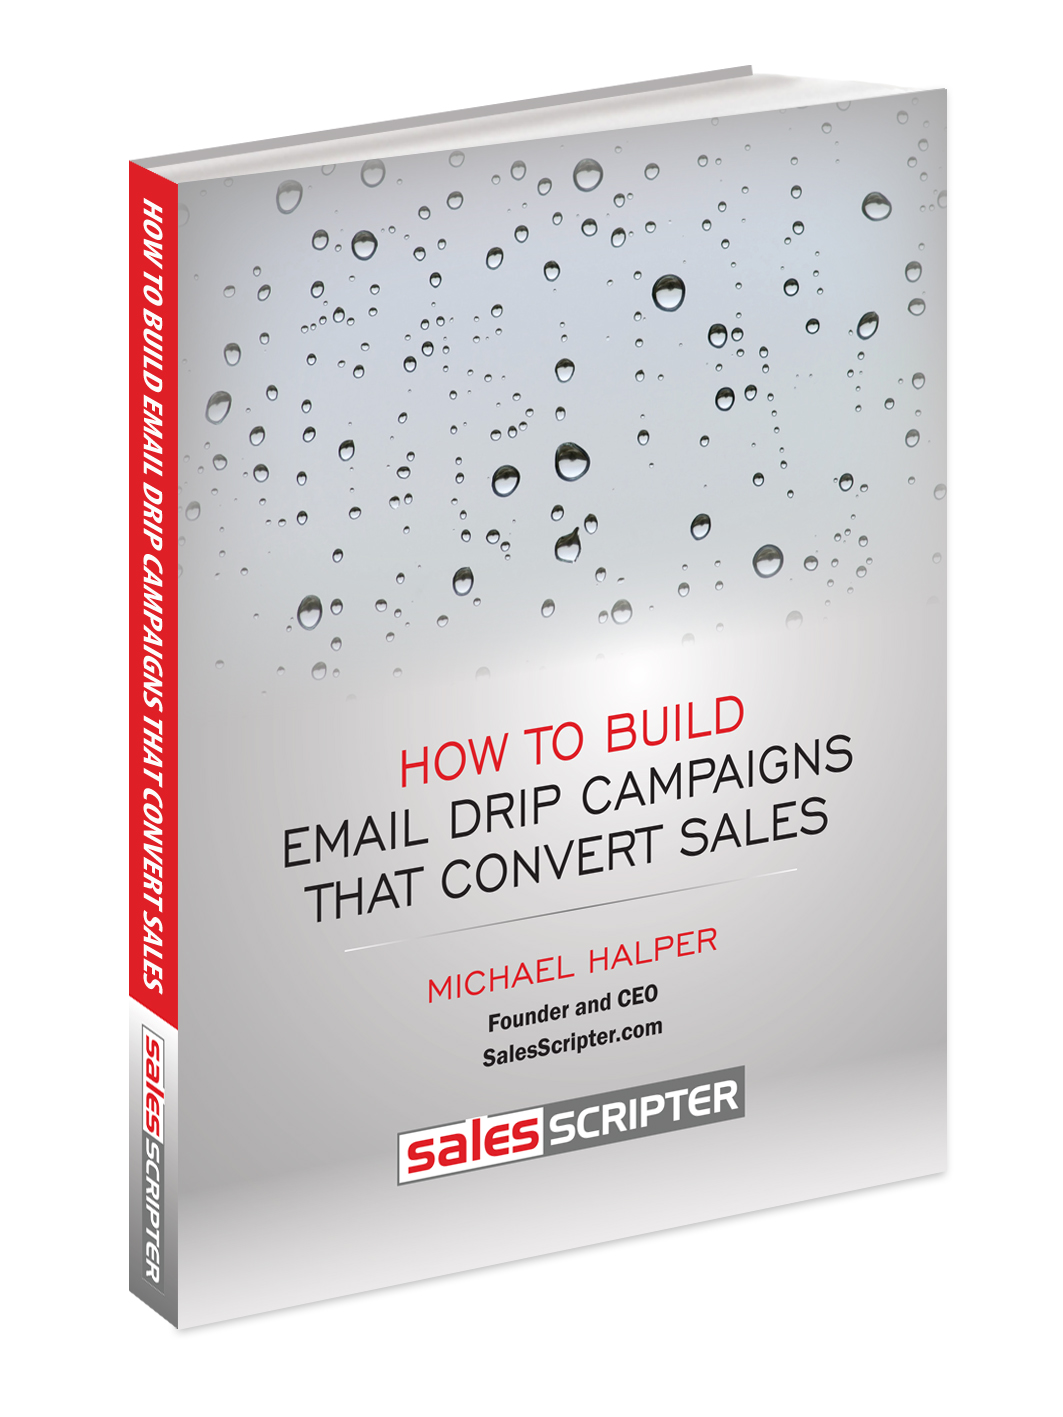 How to Build Email Drip Campaigns that Convert Sales